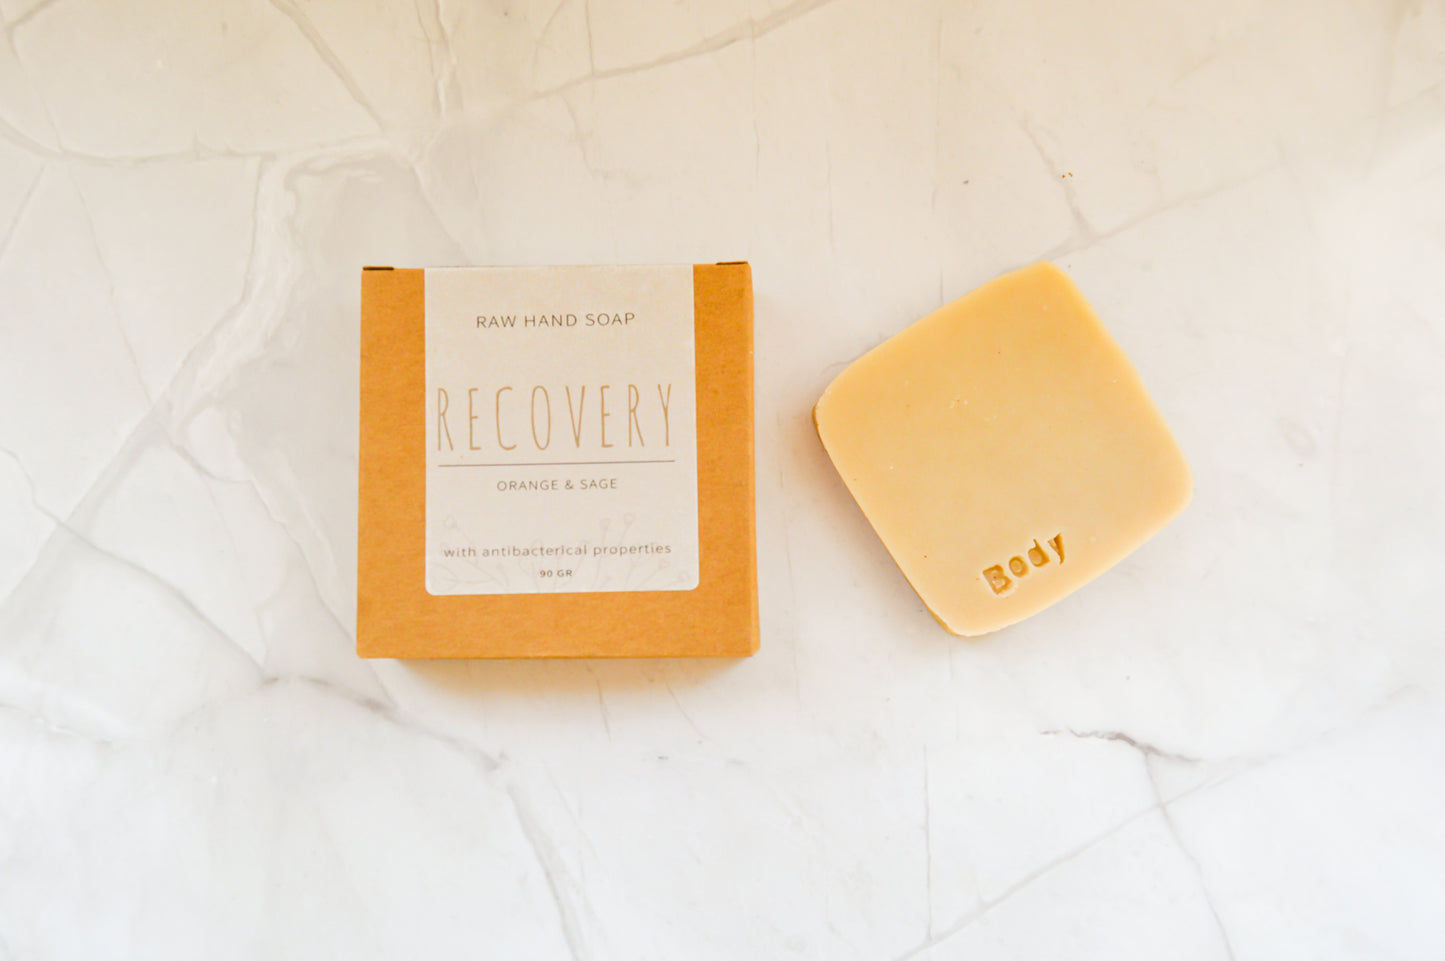 RAW HAND SOAP BAR - RECOVERY with orange & sage